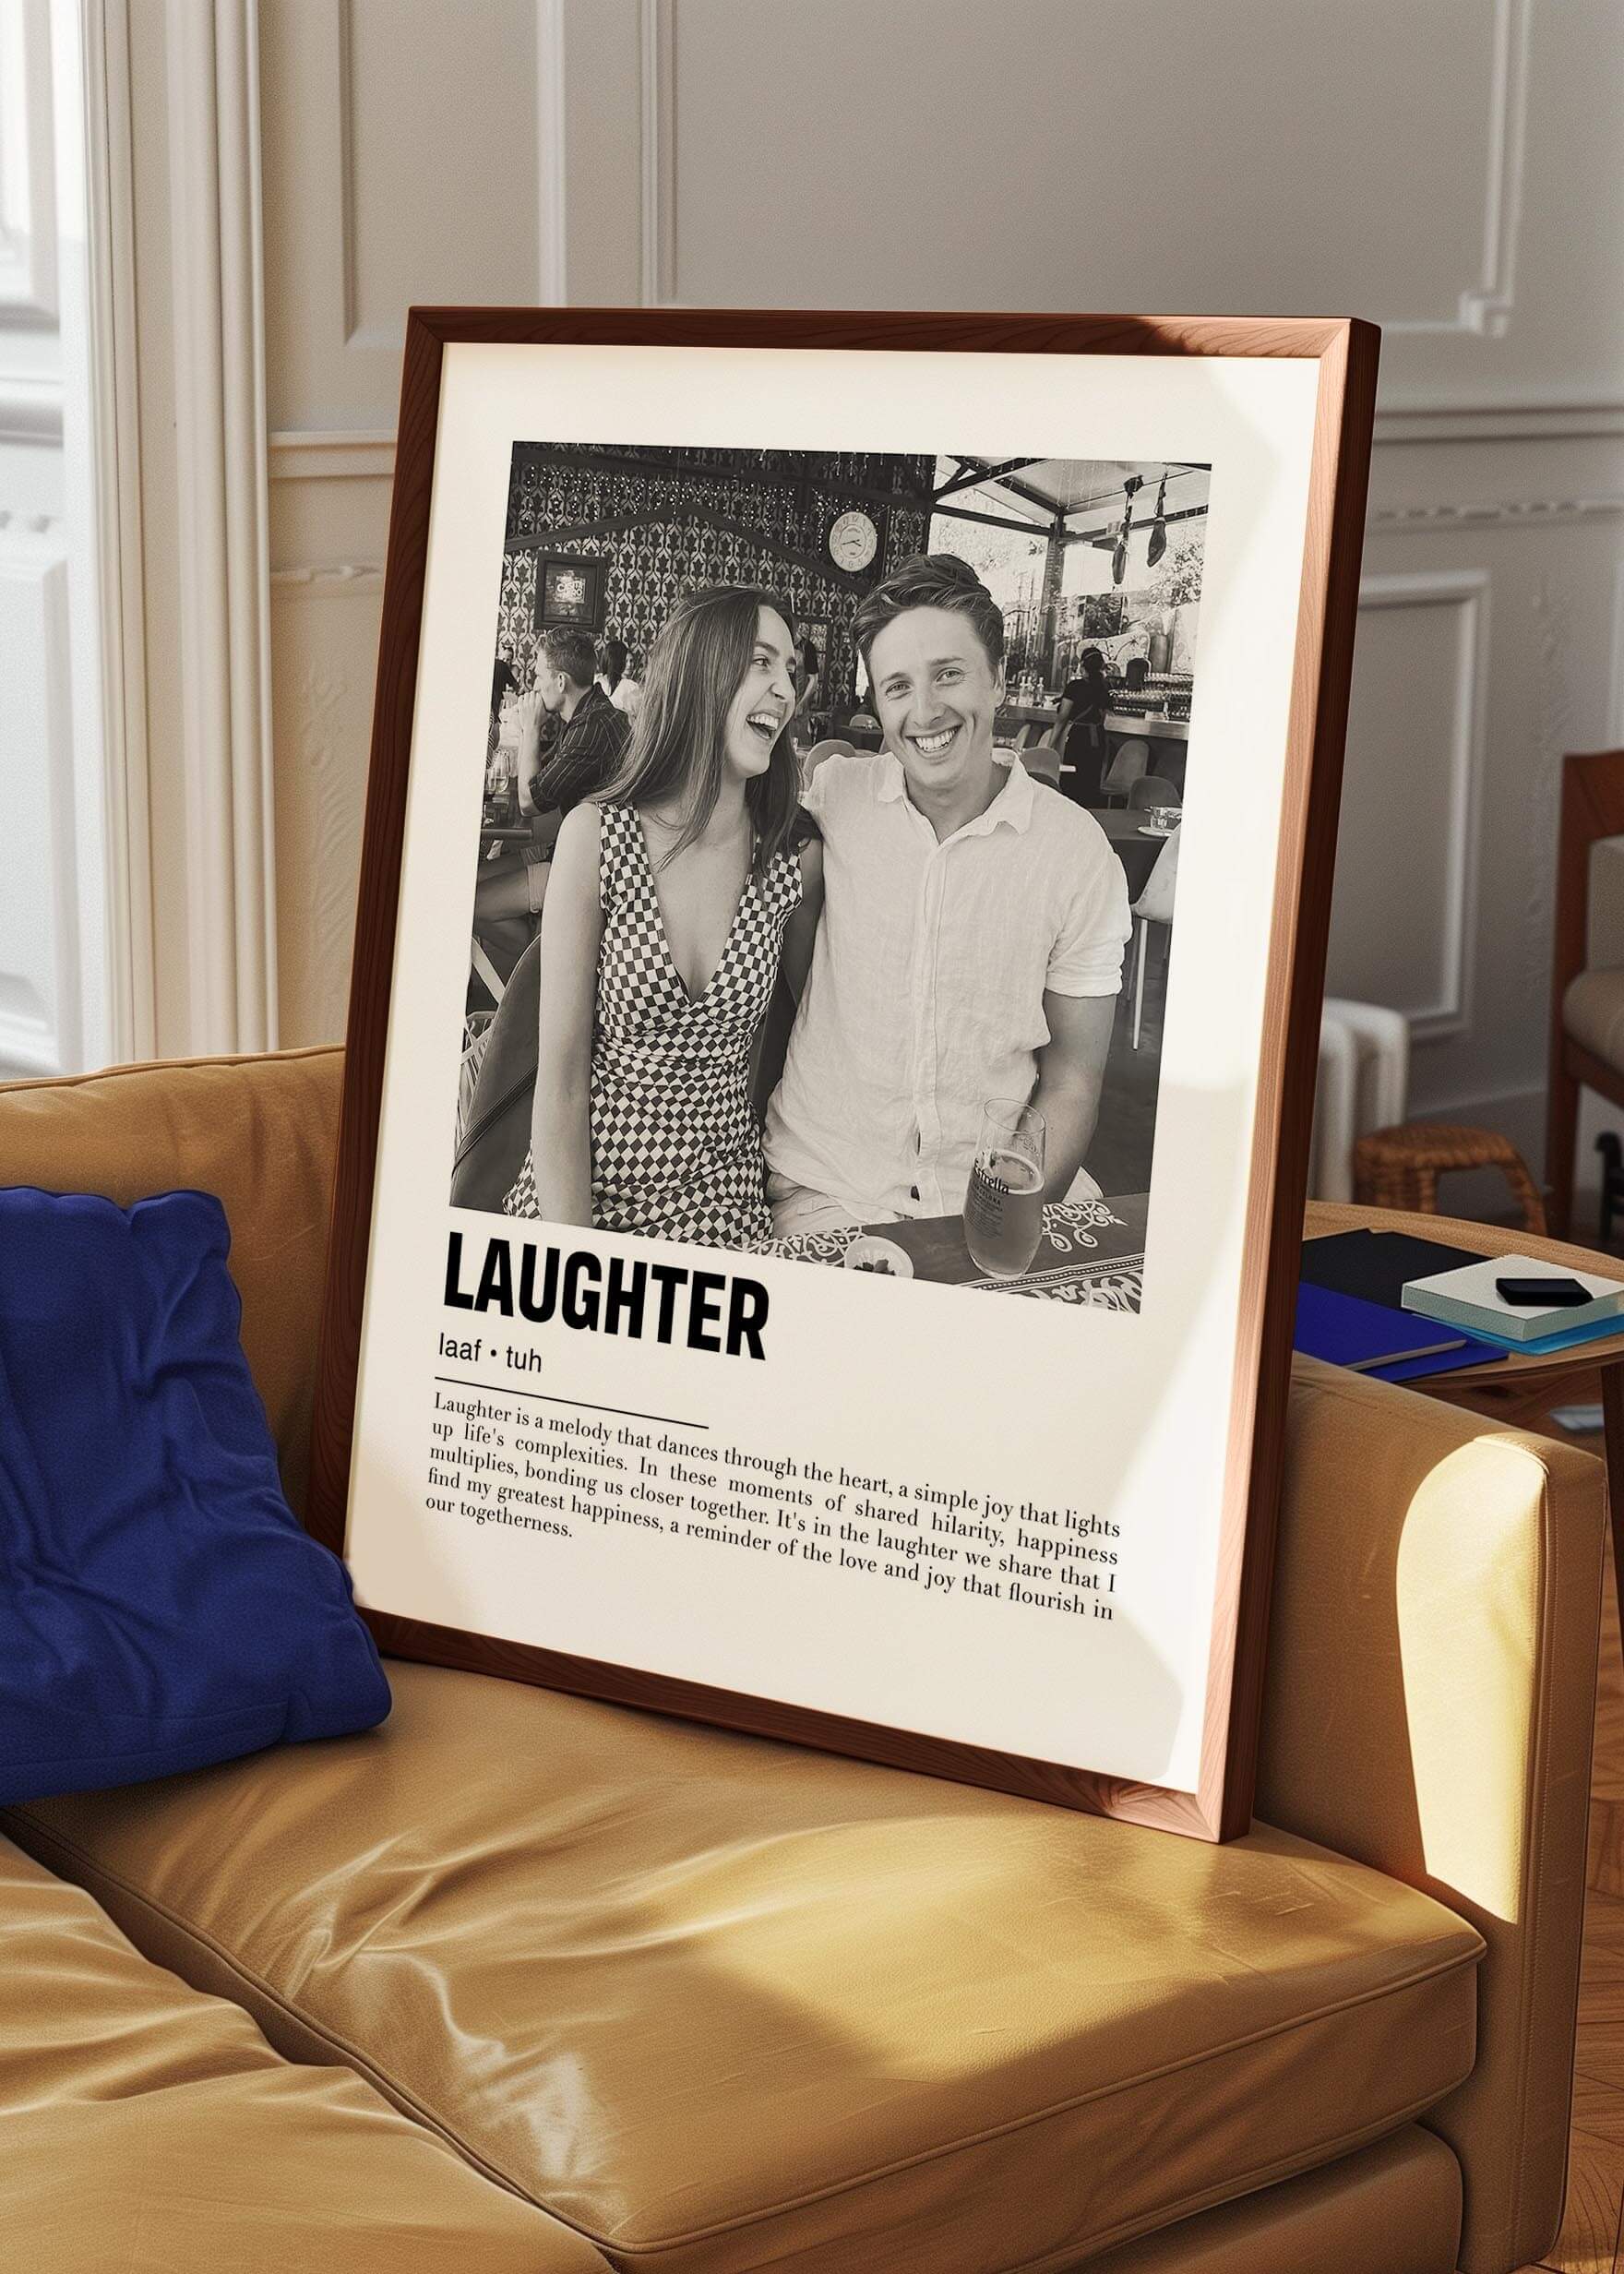 Personalized black and white photo in a walnut frame of a couple laughing. The custom artwork has a caption that reads Laughter. The walnut frame is on a sofa.